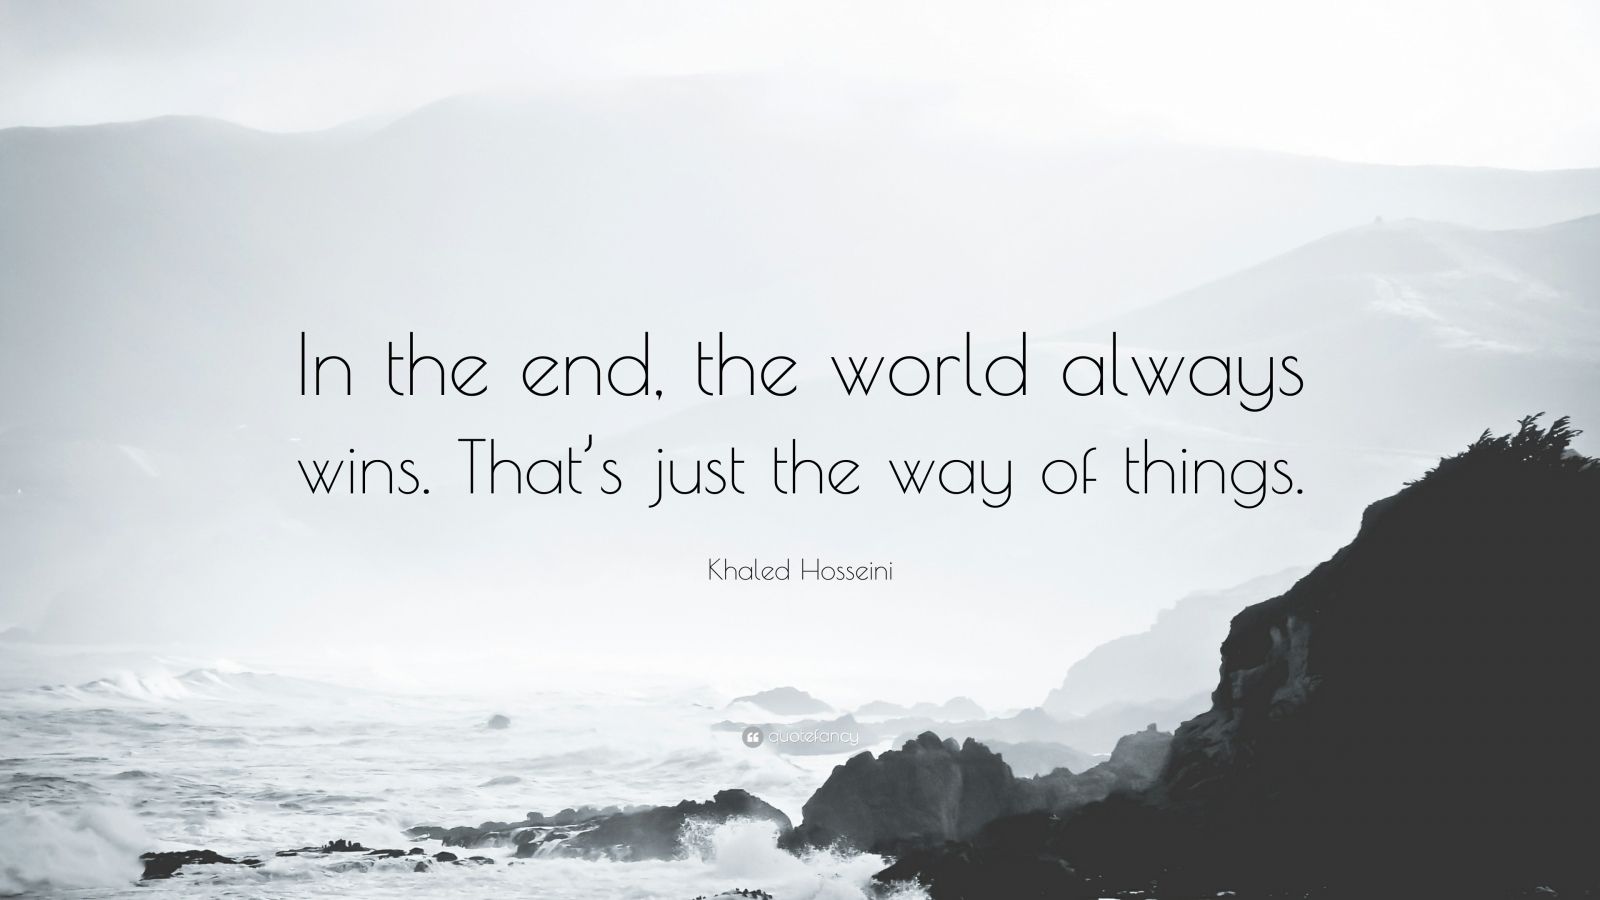 Khaled Hosseini Quote “In the end the world always wins That s just